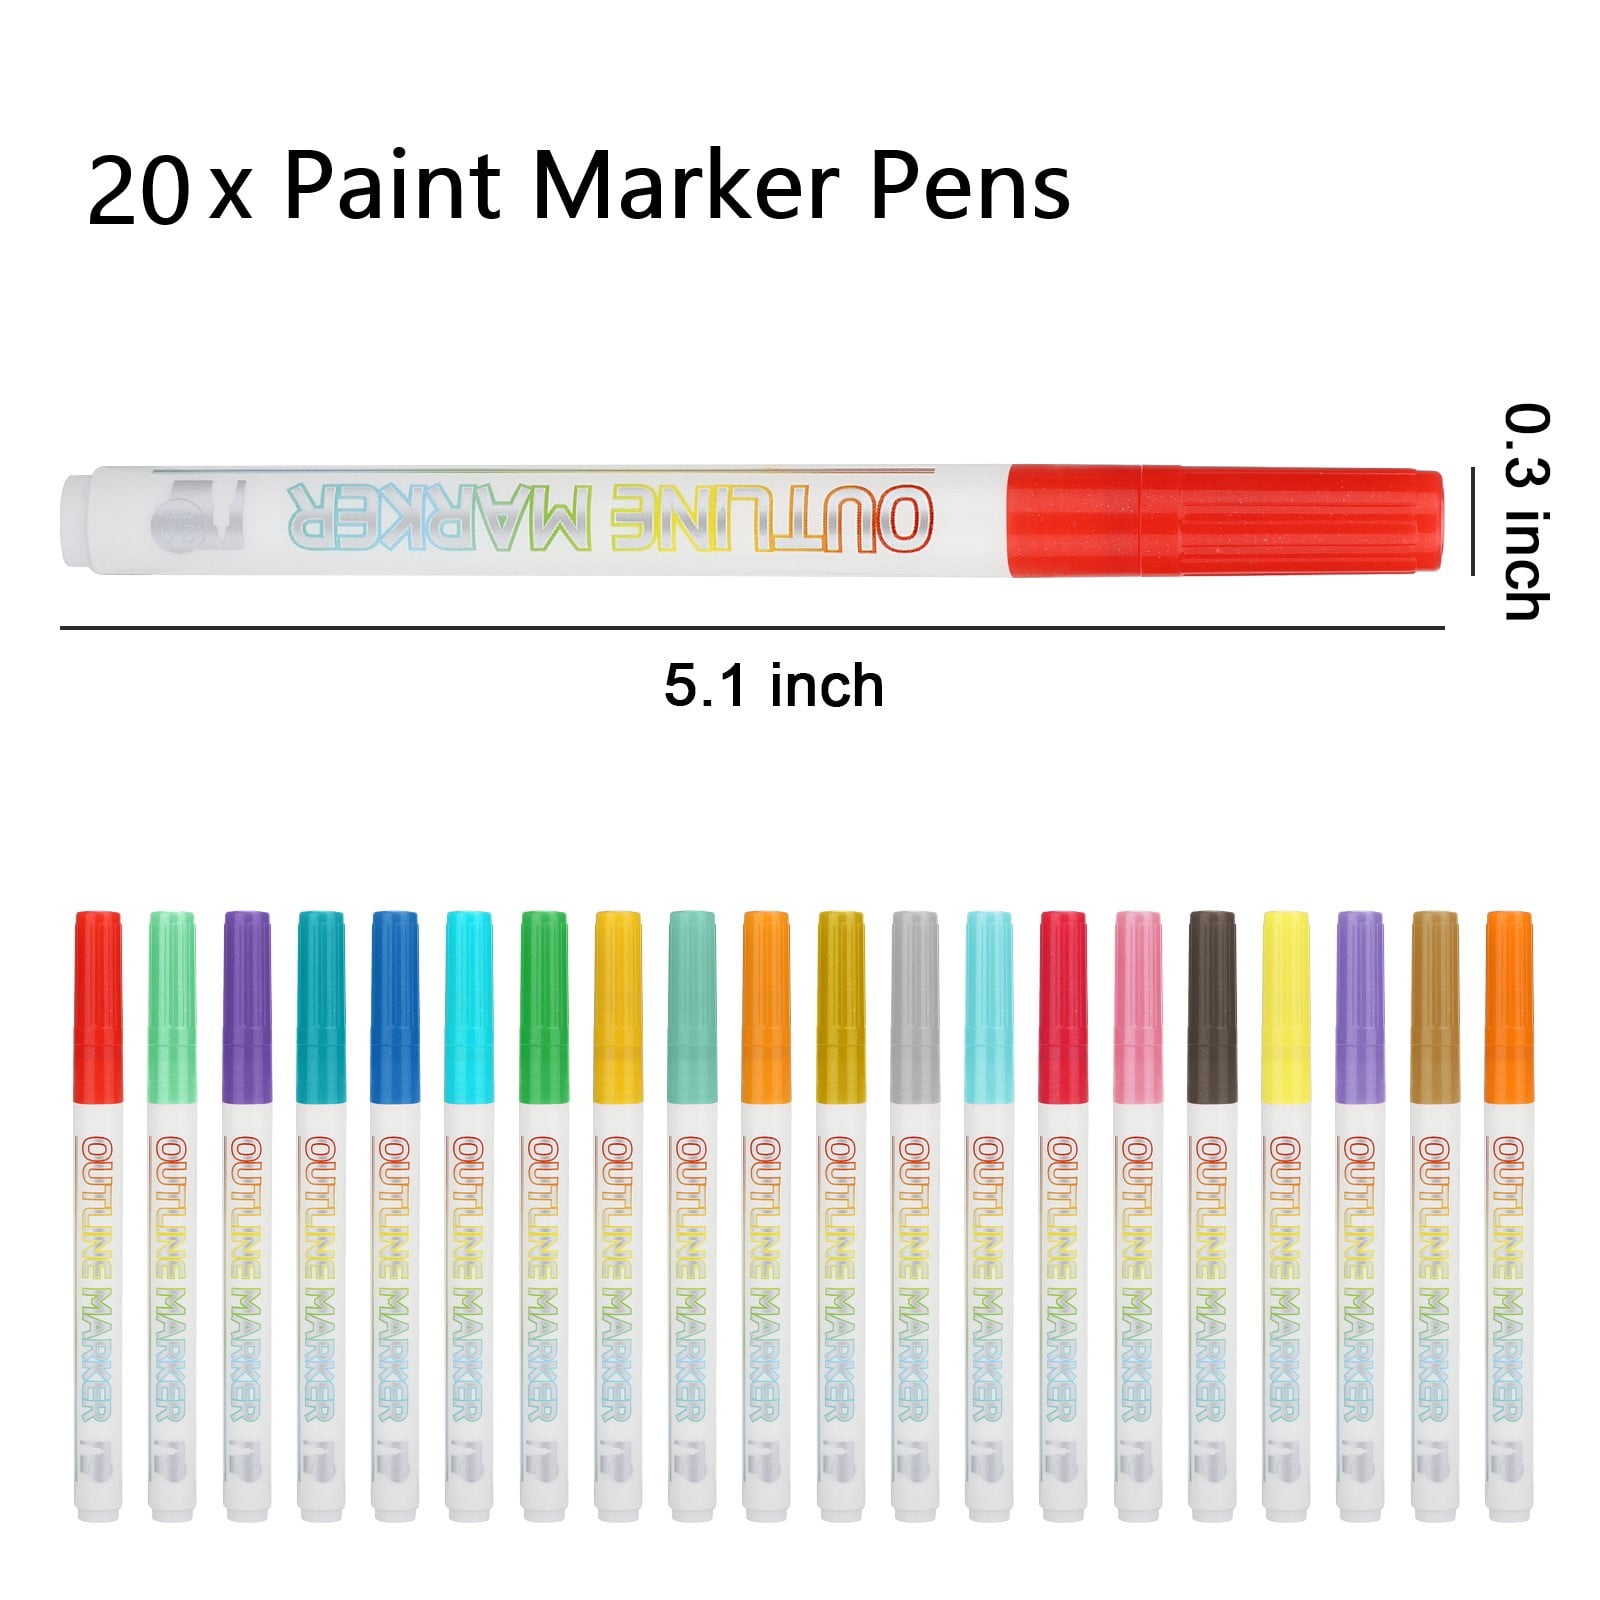 Kids Ceramic Paint Paint Marker Pen For DIY Acrylic Painting, Wood, Rock,  Glass, And Drawing 230803 From Cong05, $8.64